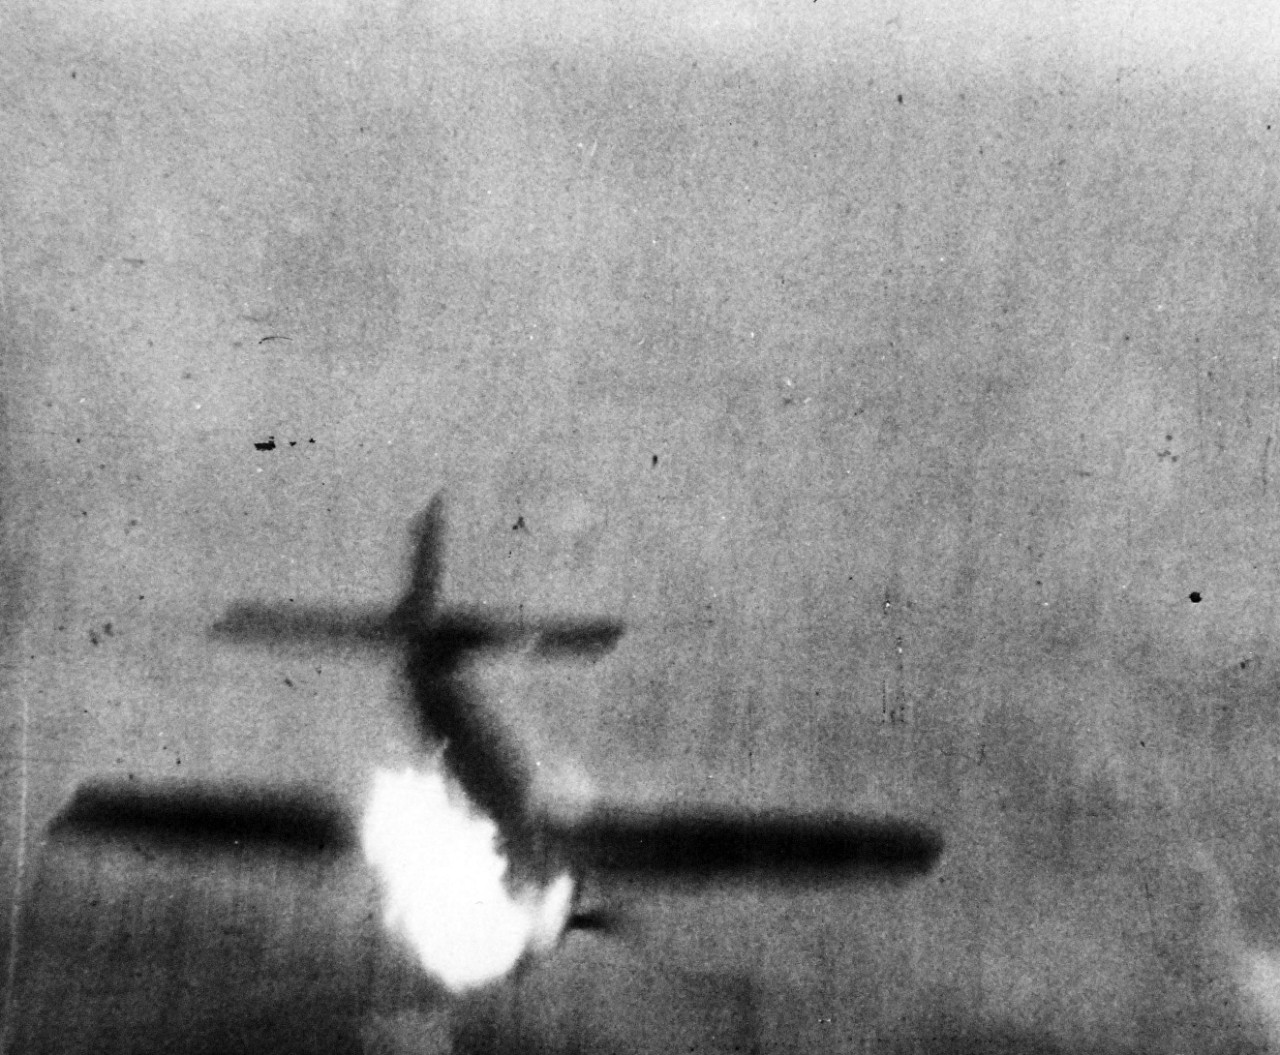 80-G-49706:  Japanese Kamikaze Attack, June 1945.  Flames stream out from a Japanese Kamikaze as it is hit by anti-aircraft fire in its futile attempt to crash against the carrier.  Released June 28, 1945.   Official U.S. Navy photograph, now in the collections of the National Archives.  